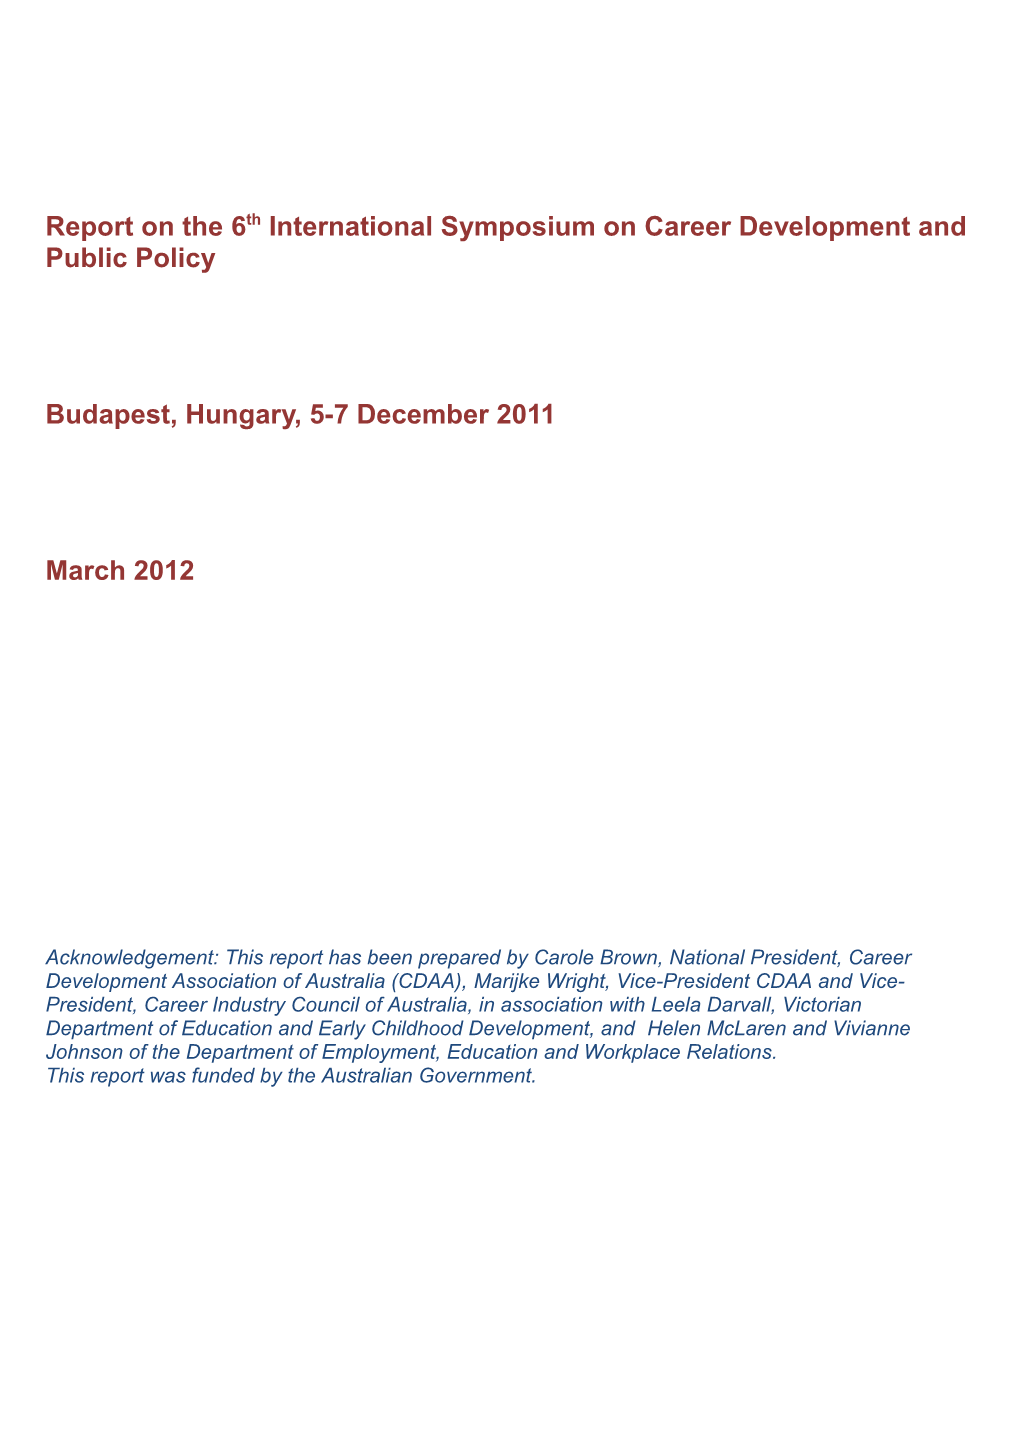 Report on the 6Th International Symposium on Career Development and Public Policy